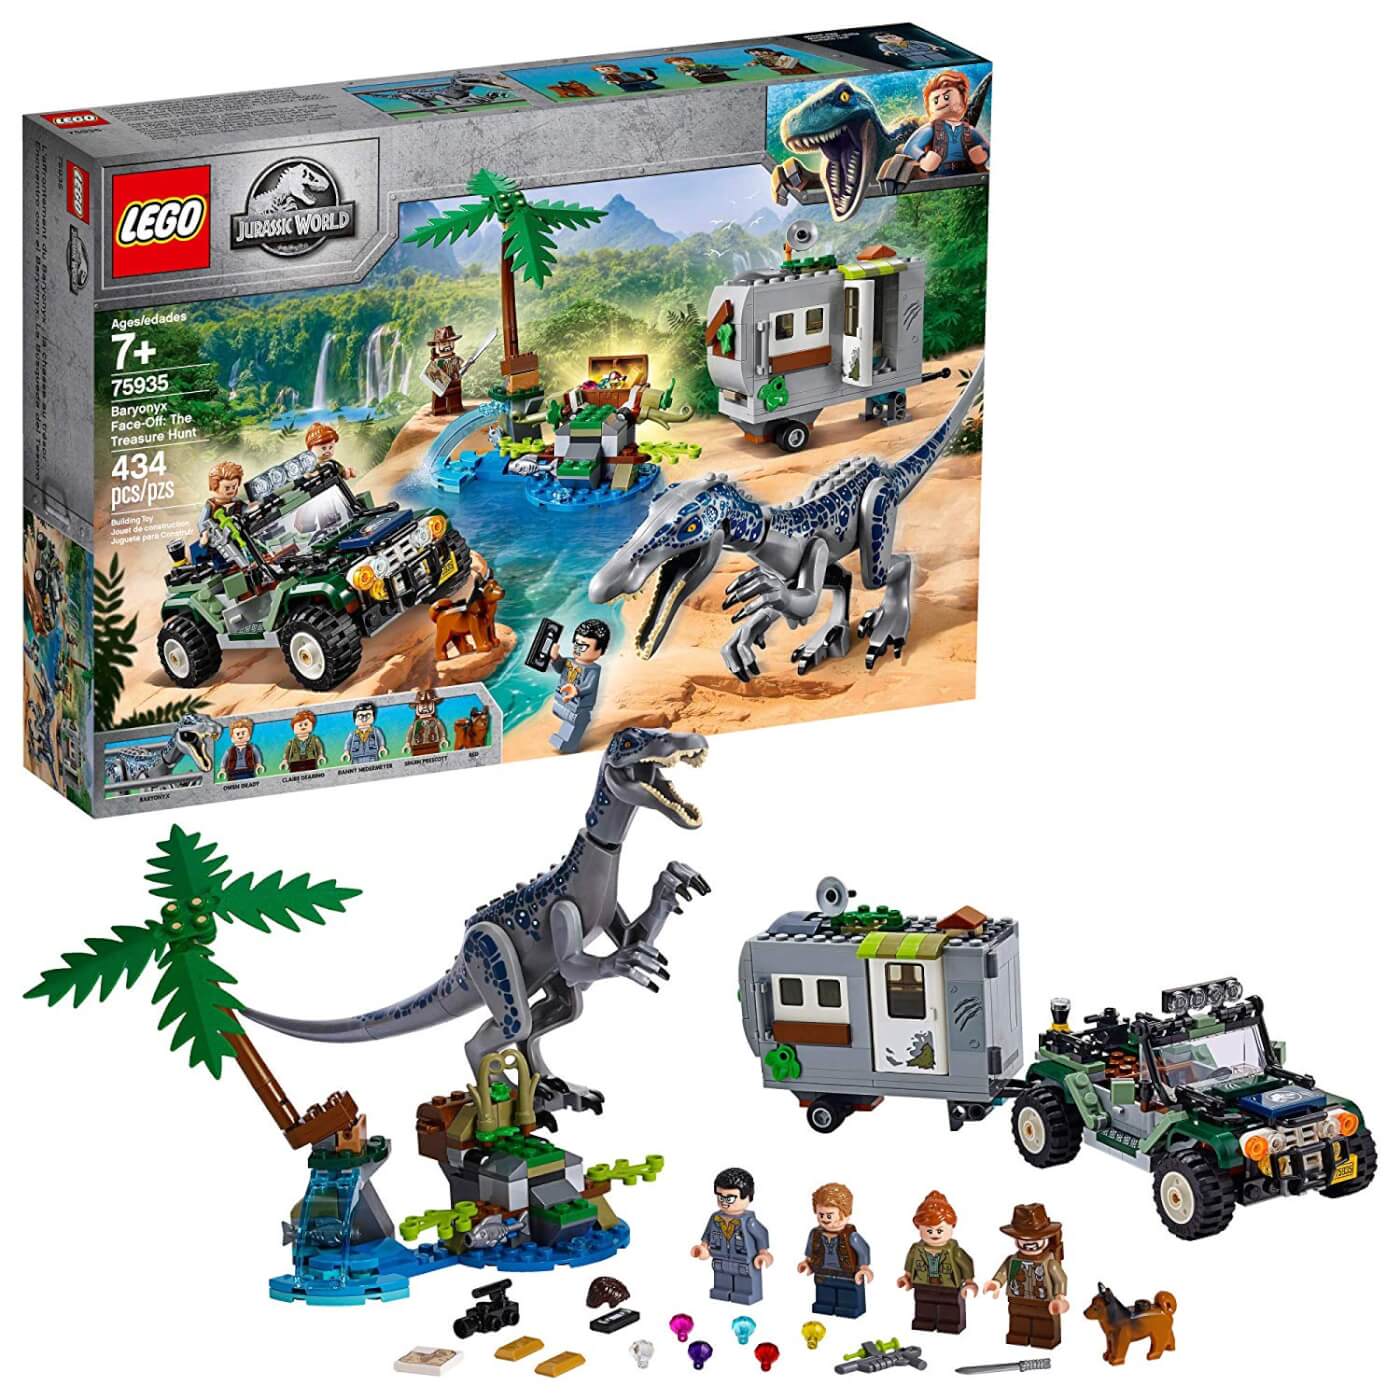 New 19 Lego Jurassic World Sets Now Available In Stores And Online Jurassic Outpost